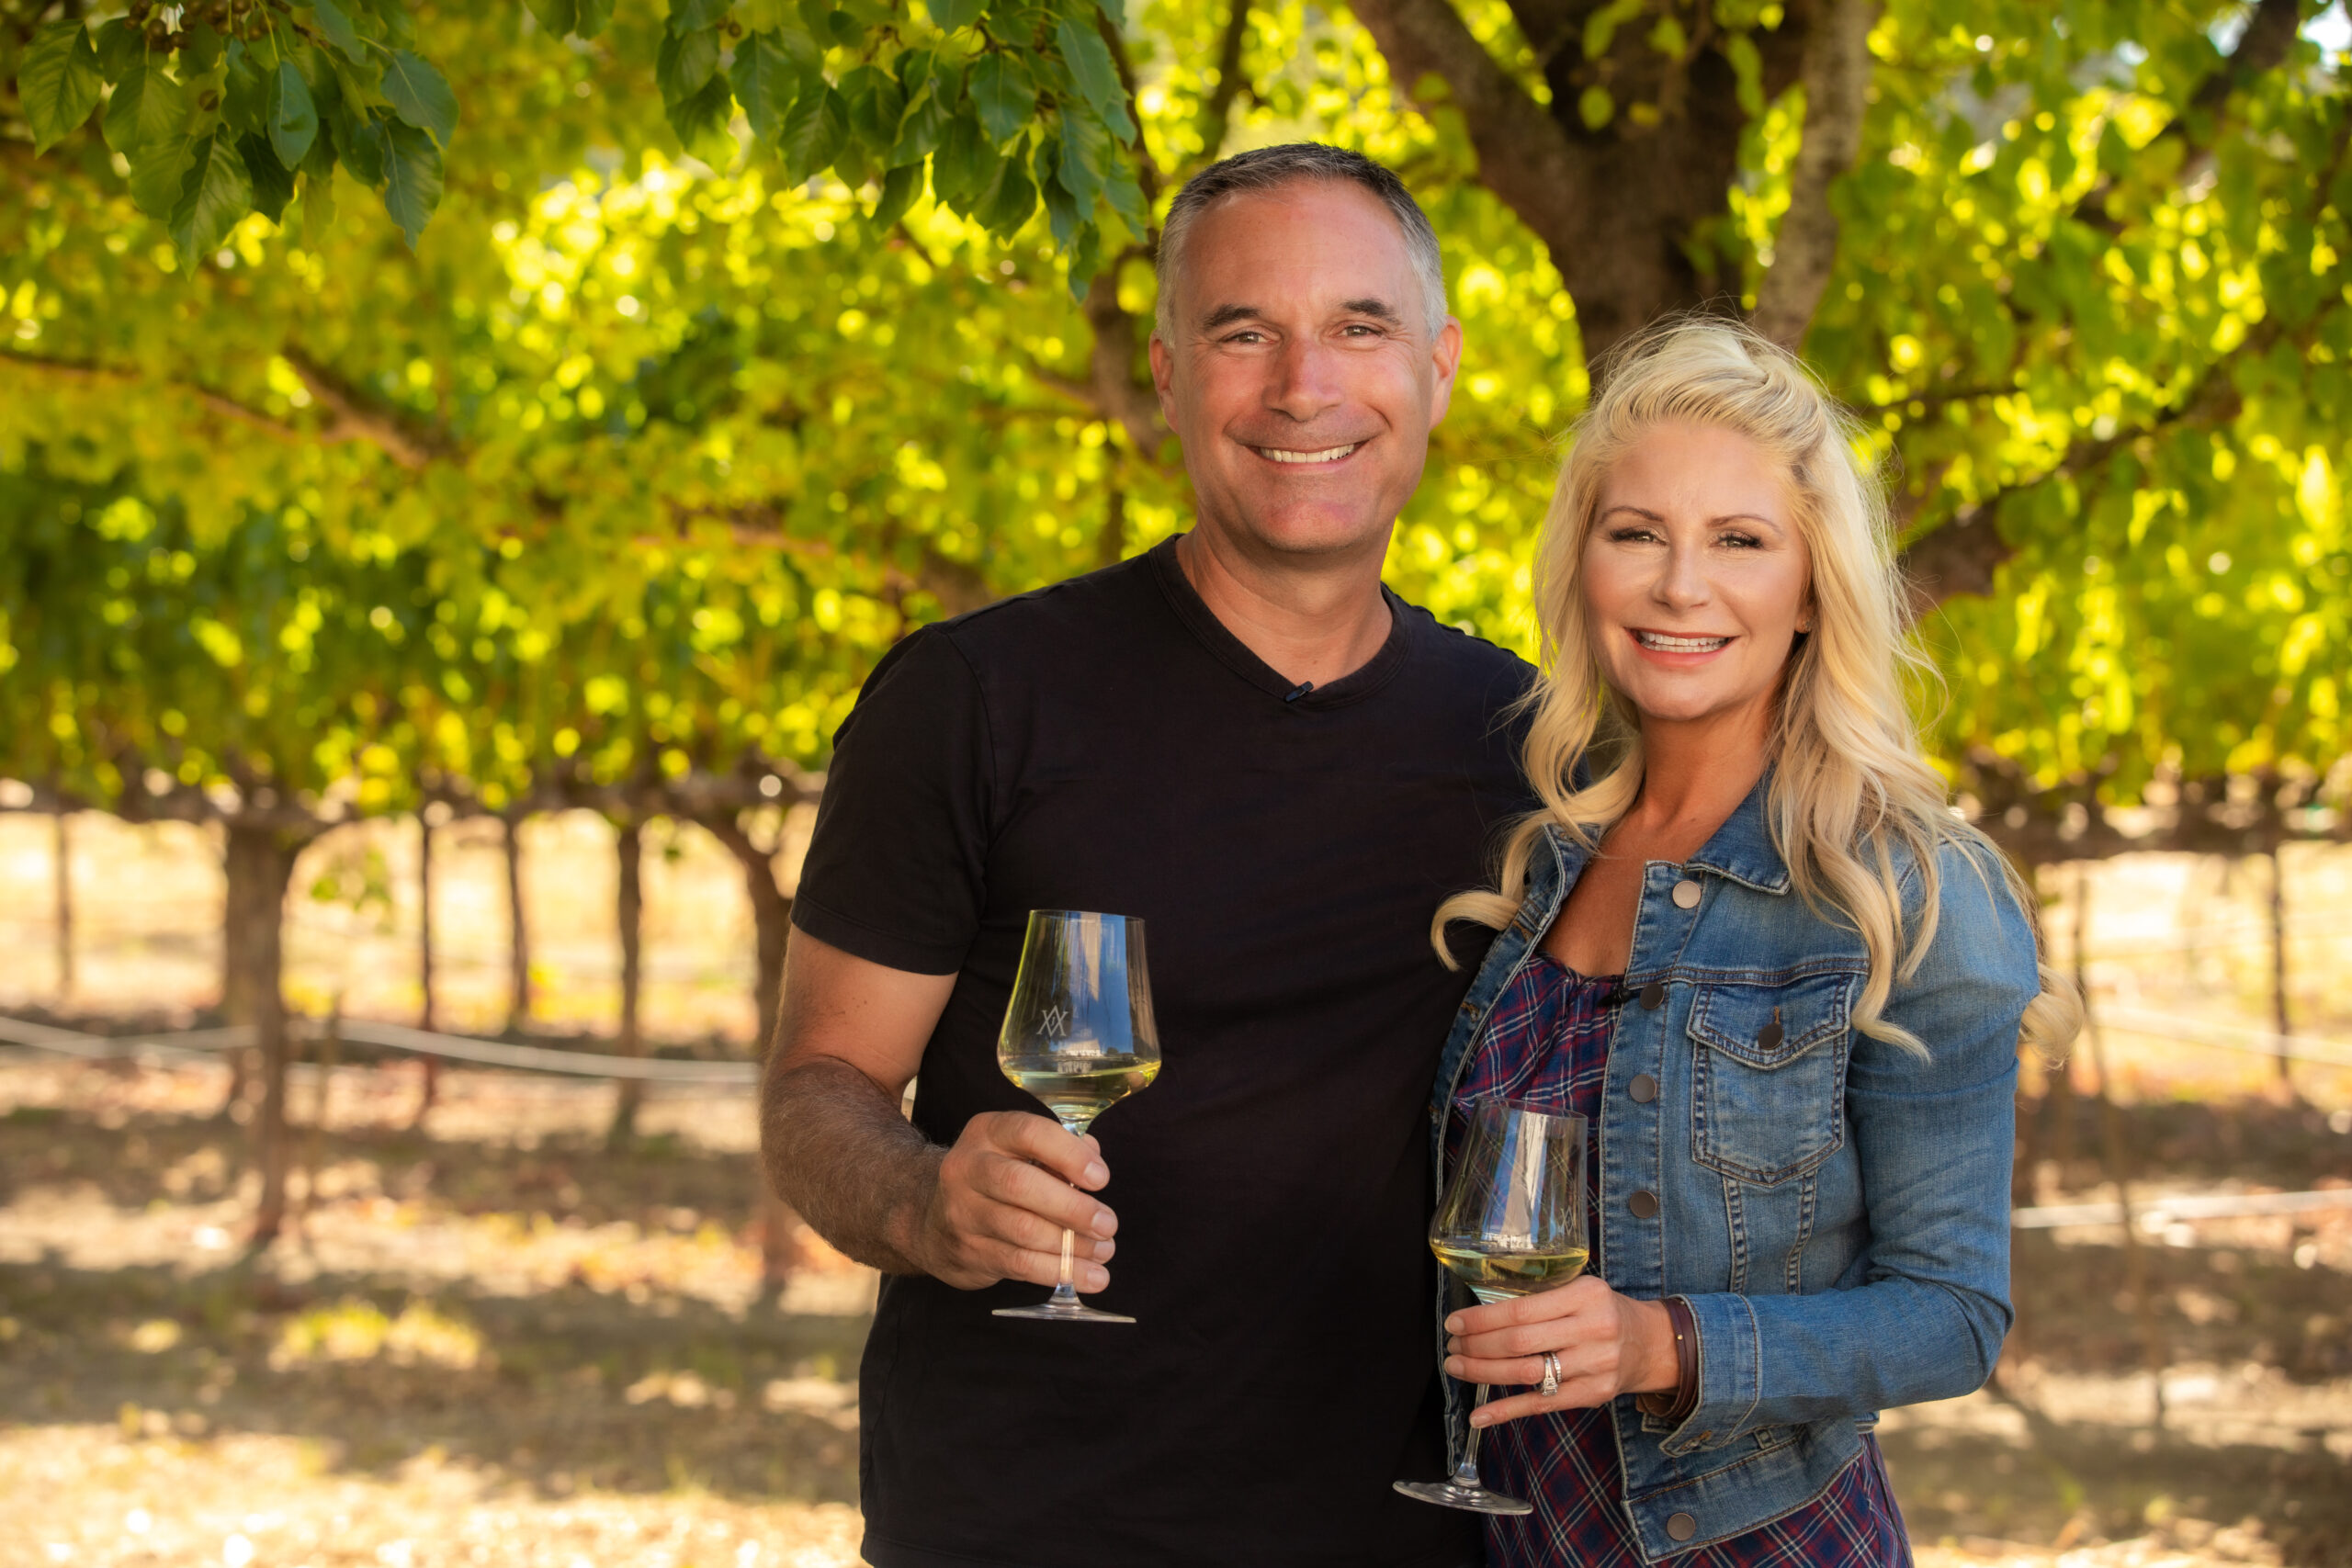 John Anthony Family of Wines Expands Philanthropic Efforts Through Upcoming Local Sponsorships